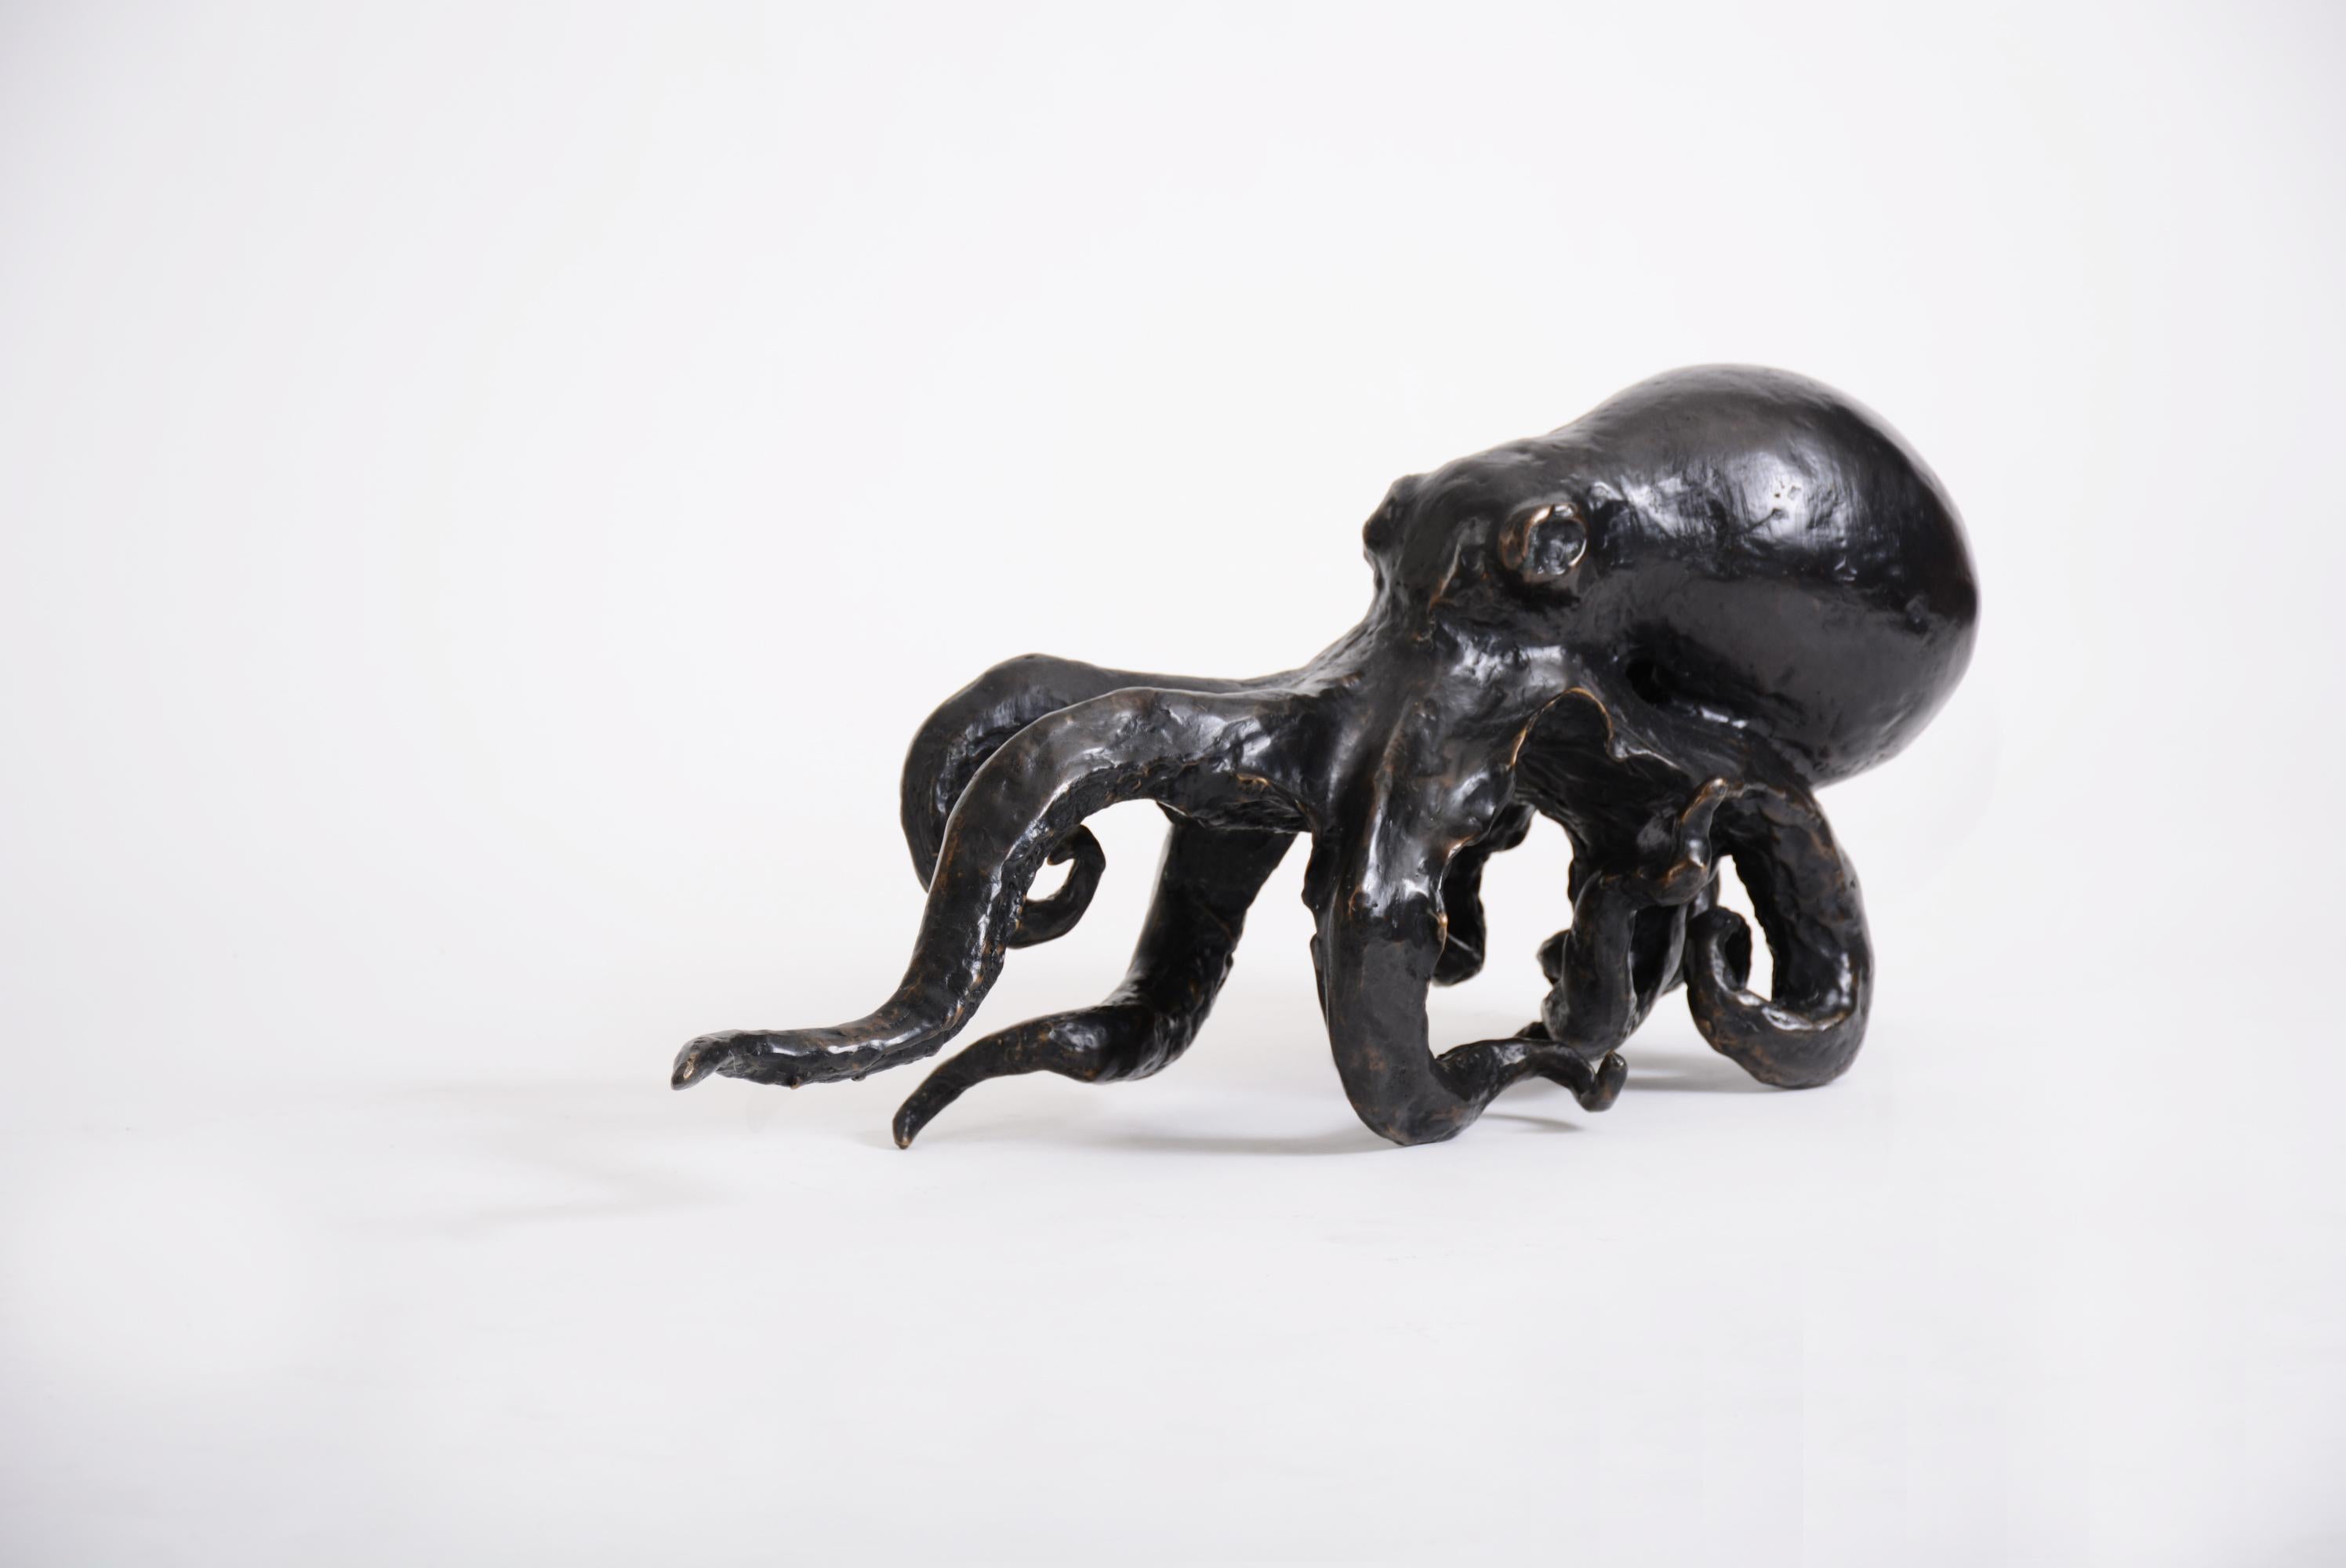 Made to Order Octopus sculpture in cast bronze by Elan Atelier. 12 to 24 weeks lead time.

Wild aquatic nature, unleashed indoors. This octopus is energetic, on the move, and mysterious.

Dimensions/
W 25.6 x D 7.9 x H 11 in
W 65 x D 20 x H 28